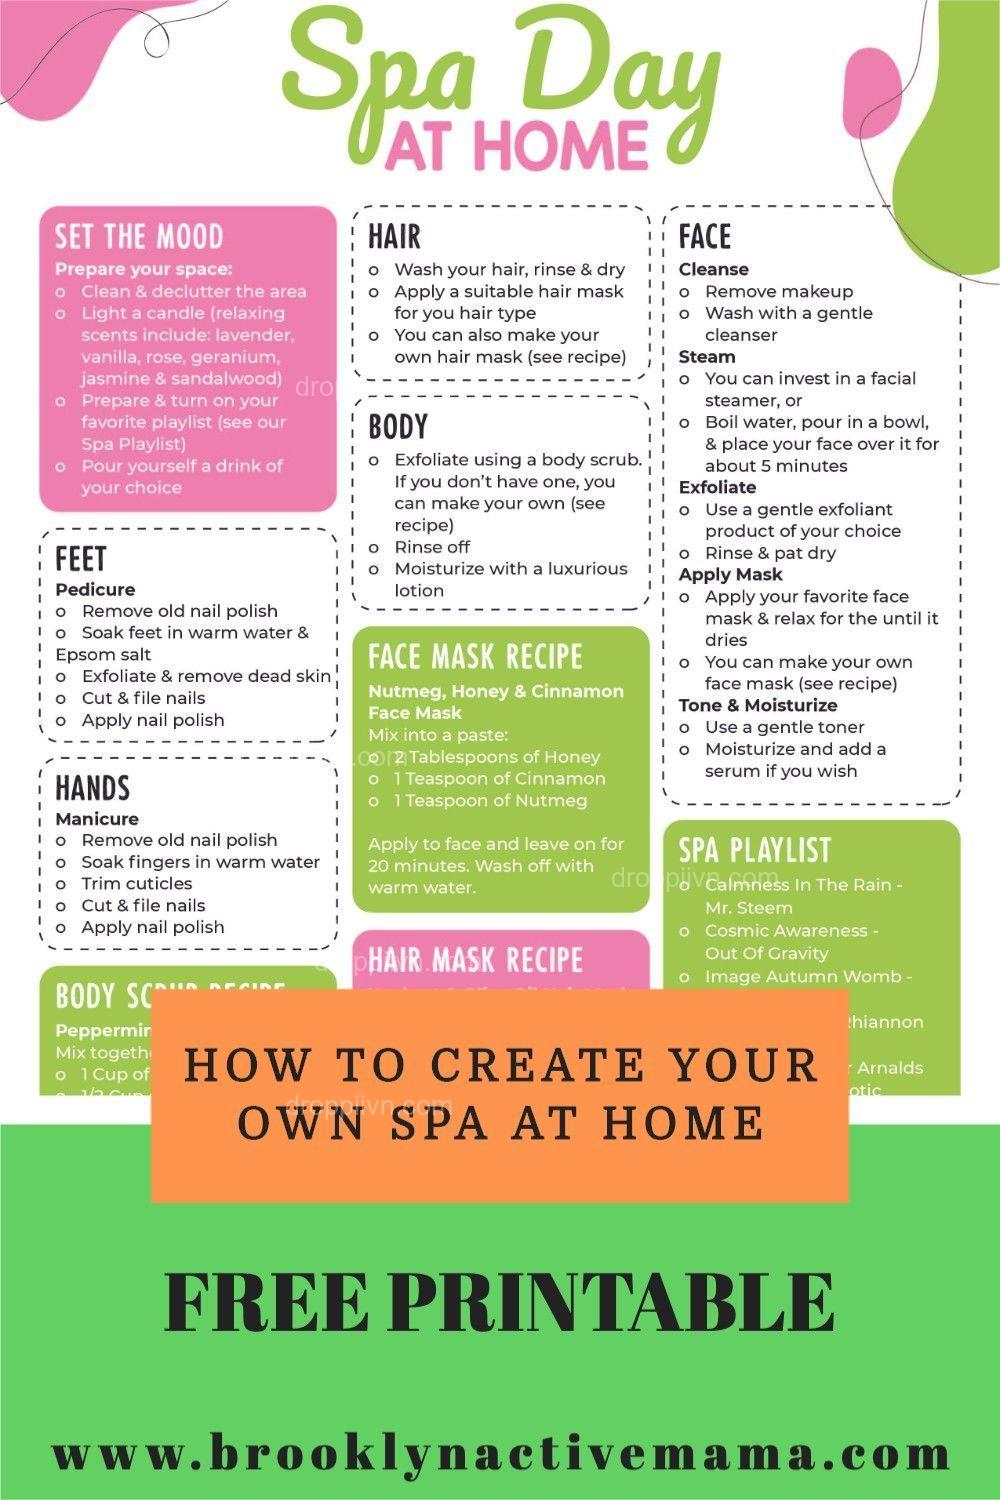 Crafting your own home spa day